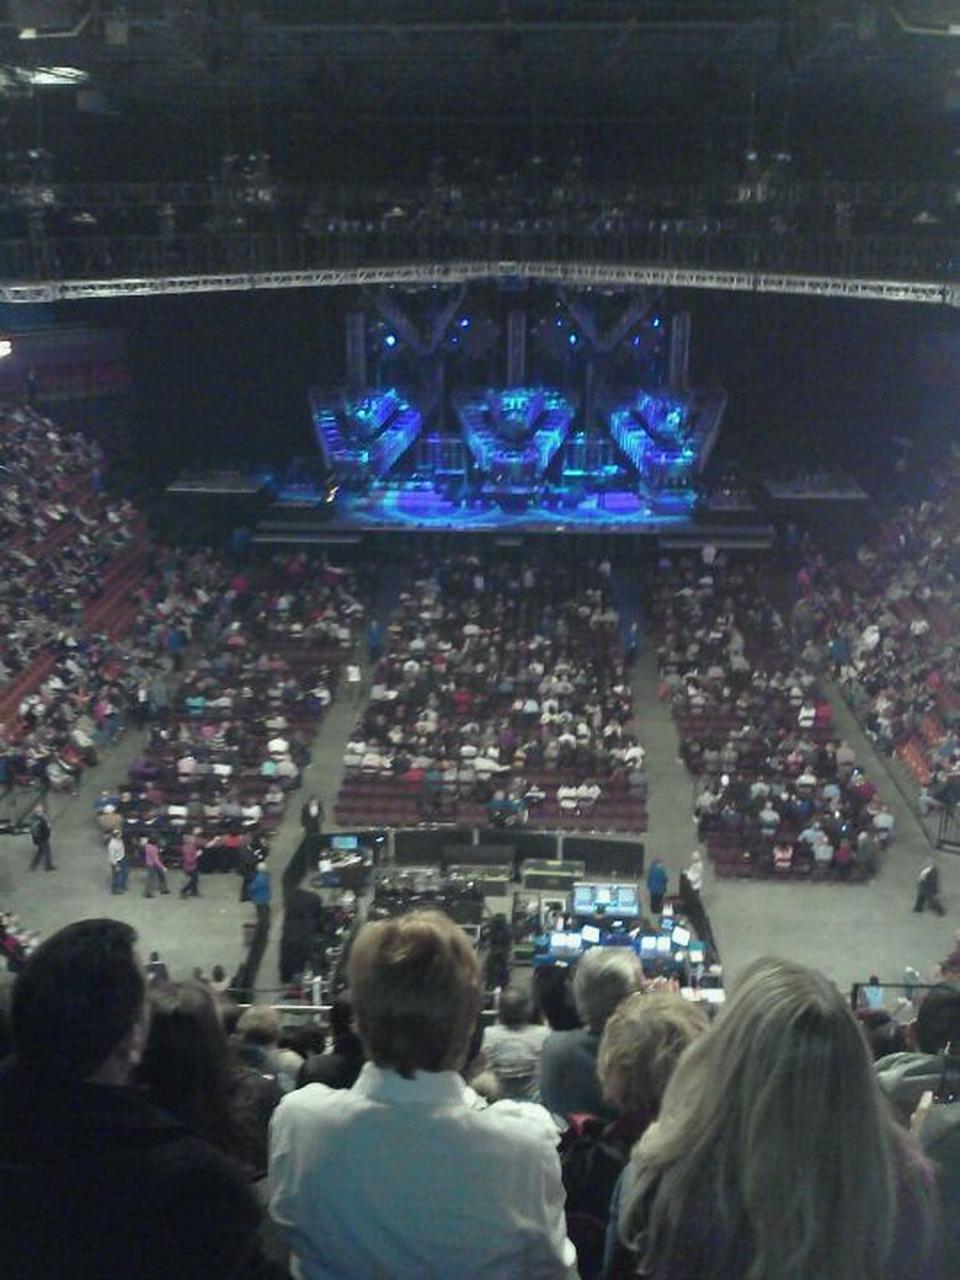 section 112 seat view  for concert - mohegan sun arena